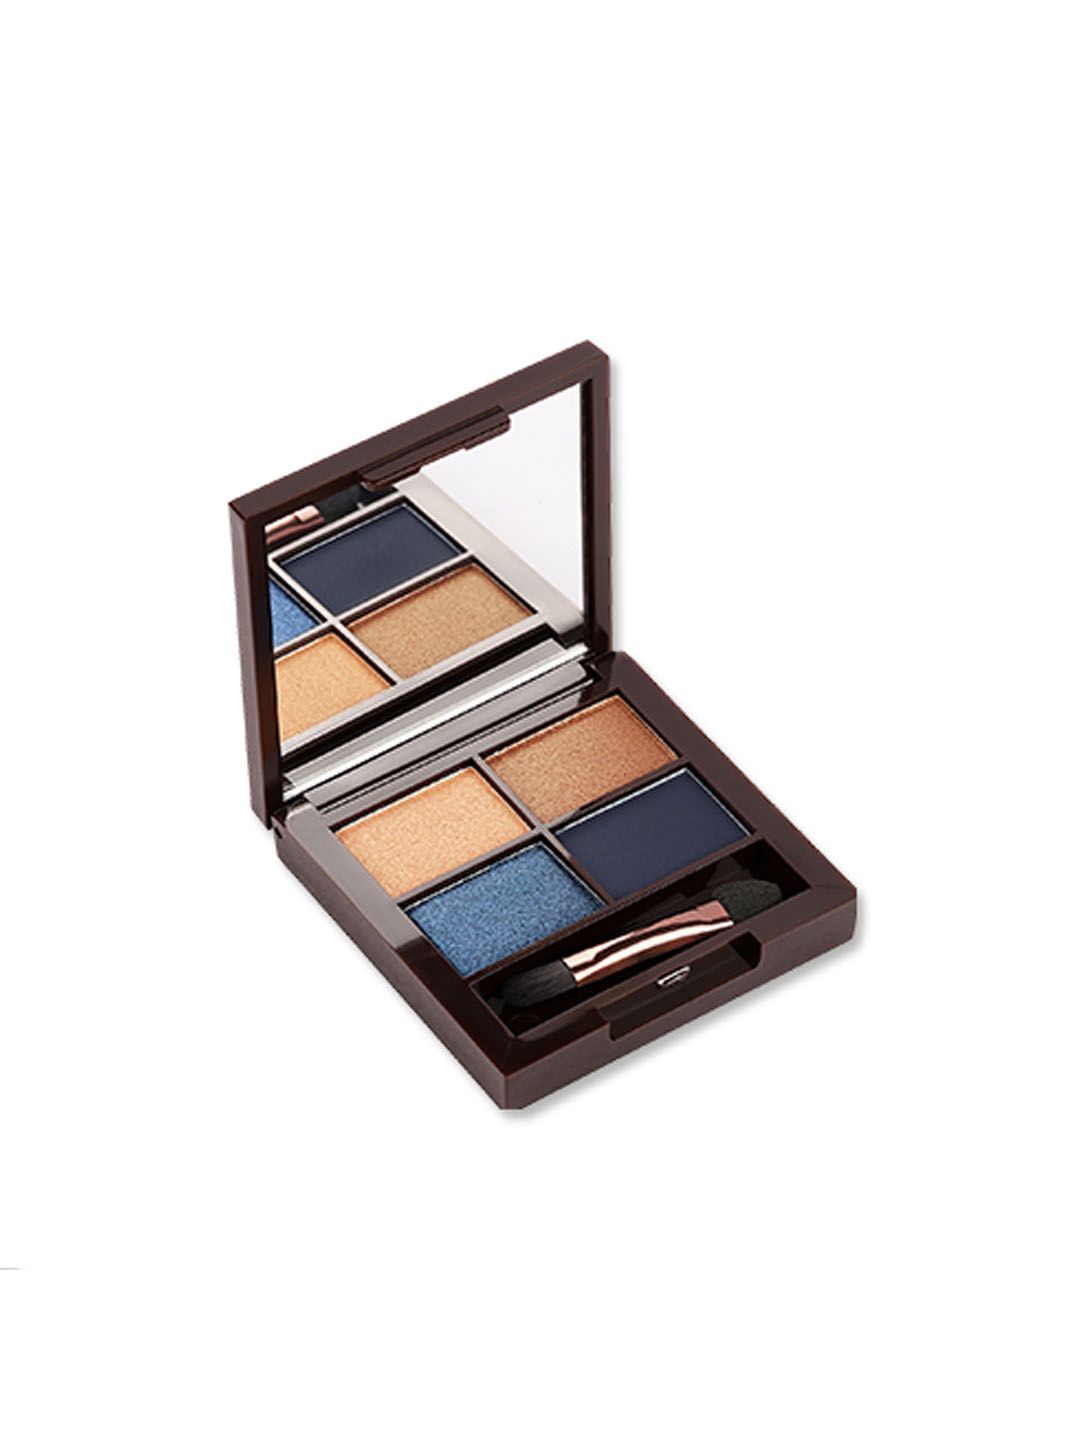 Colorbar Bewitching Eyeshadow Palette - Midsummer Breeze 003 Price in India